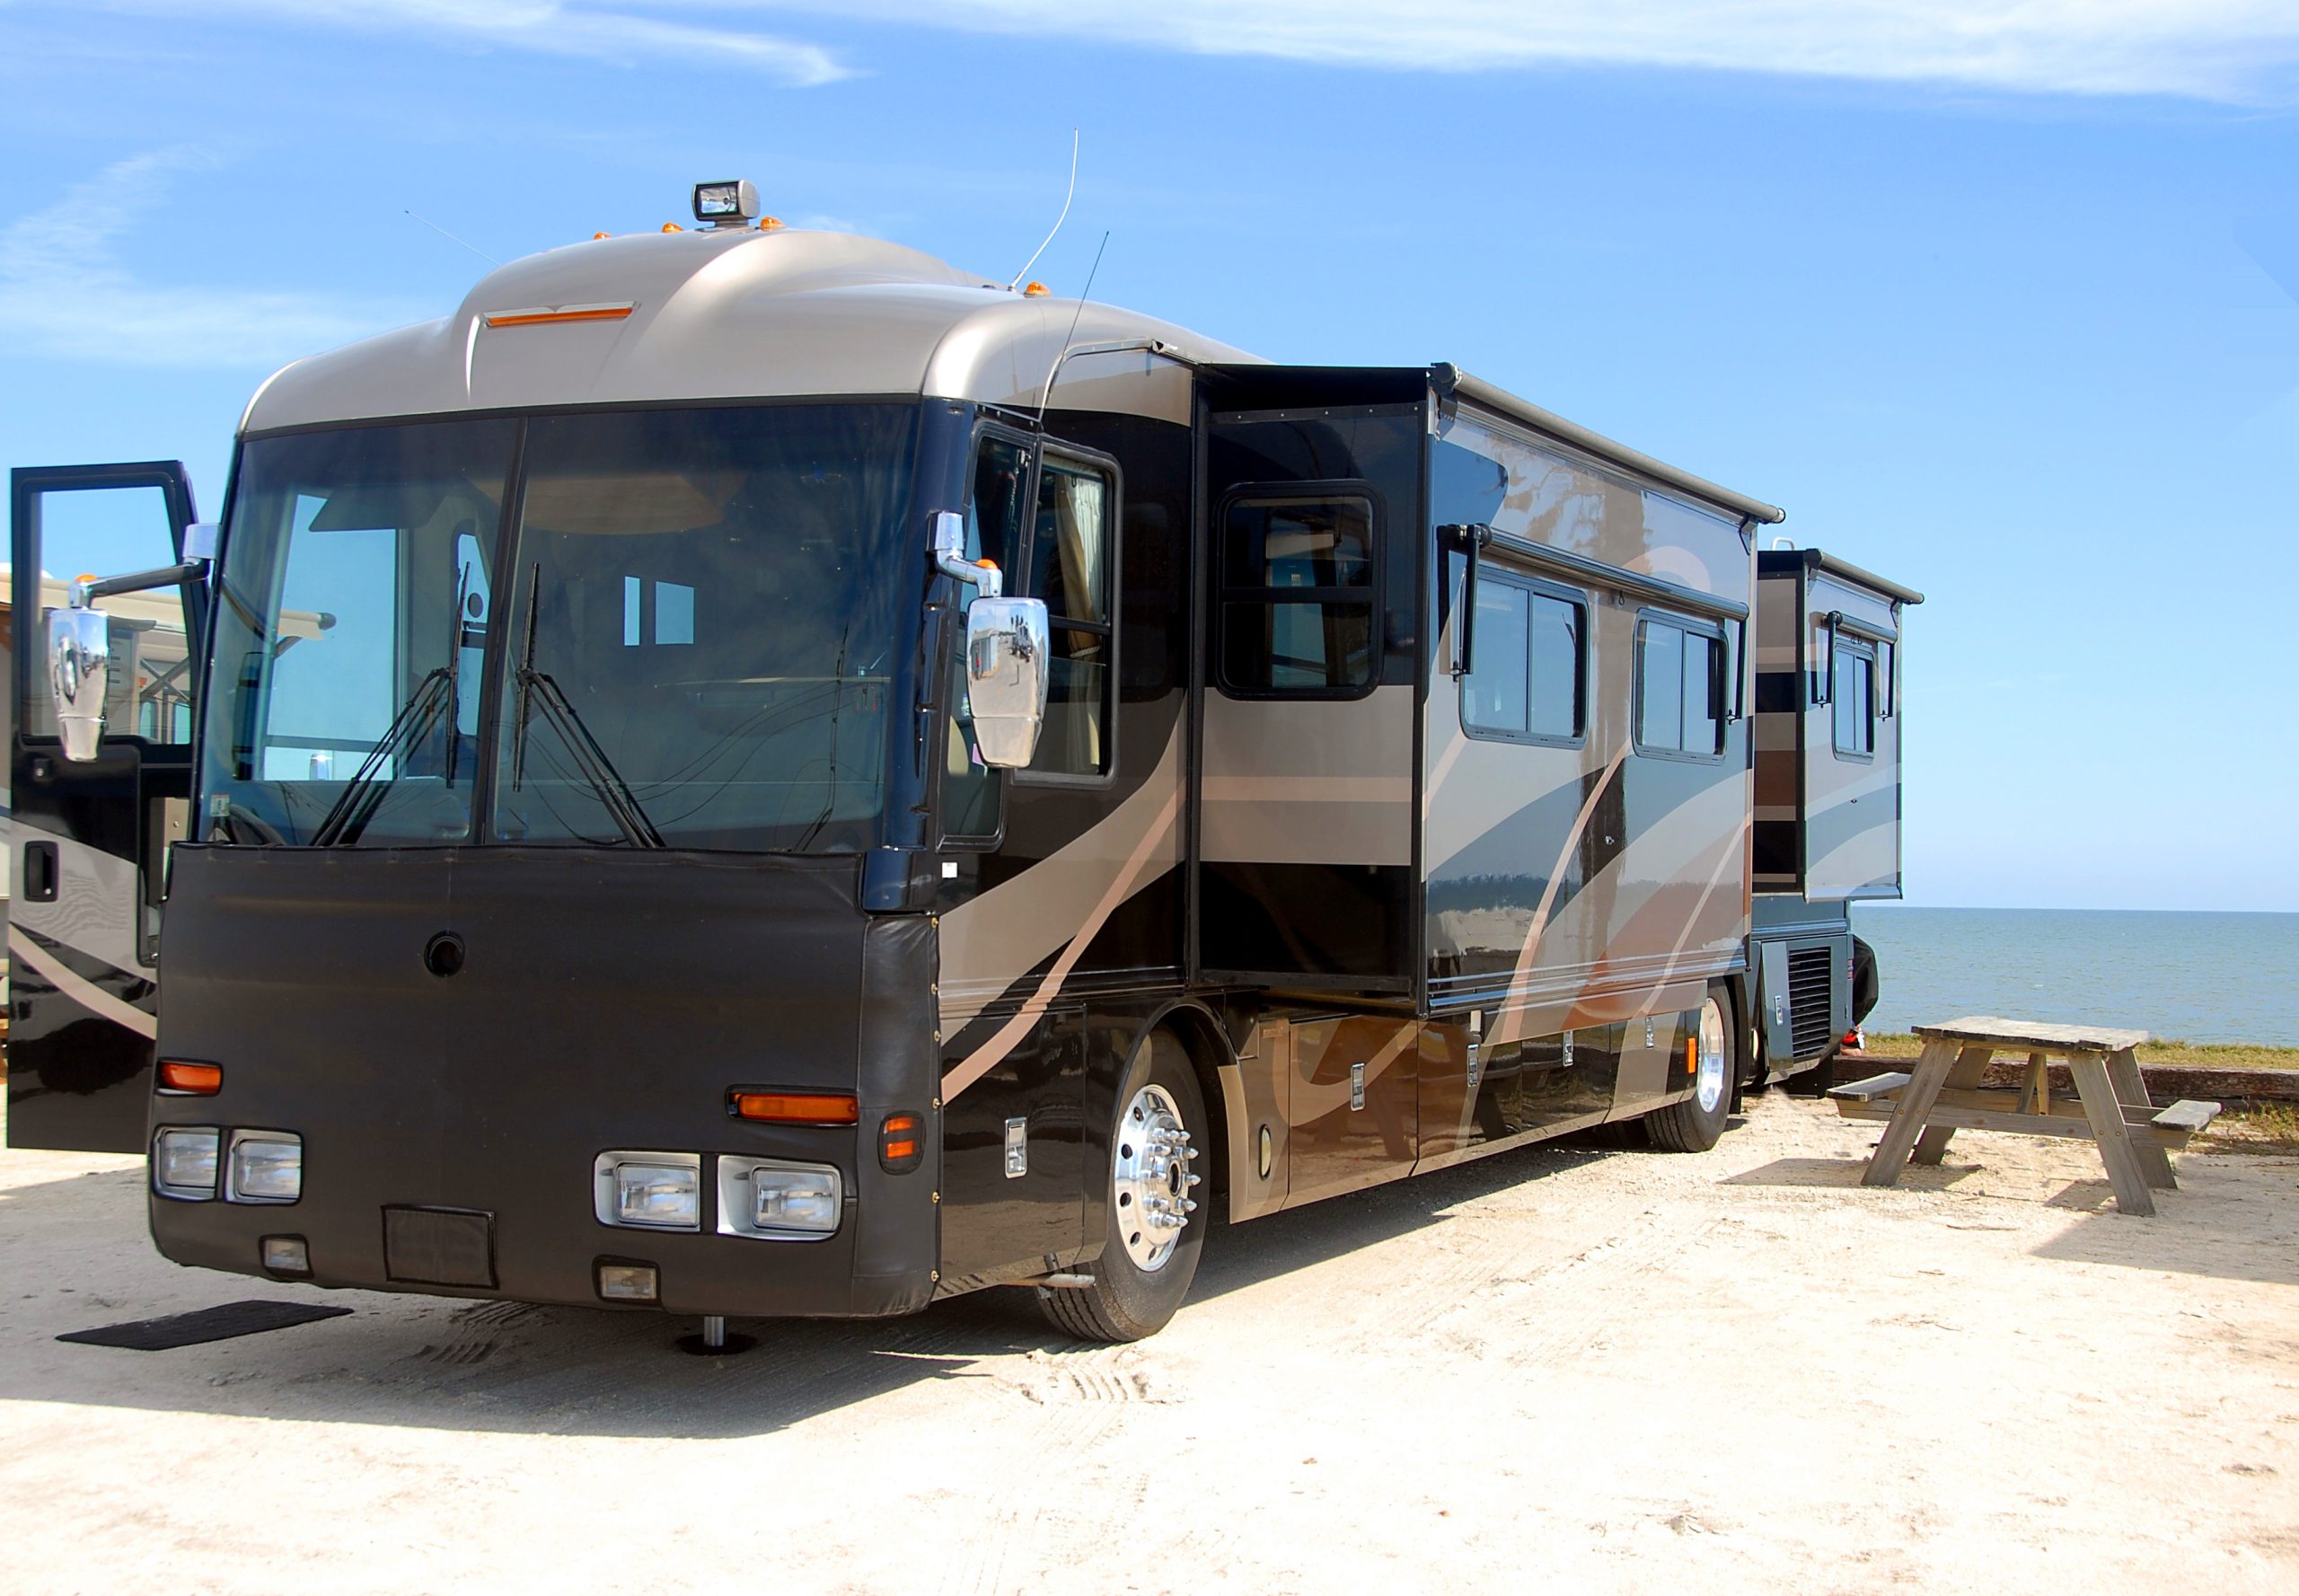 RV Maintenance Mistakes to Avoid: Common Pitfalls and How to Prevent Them